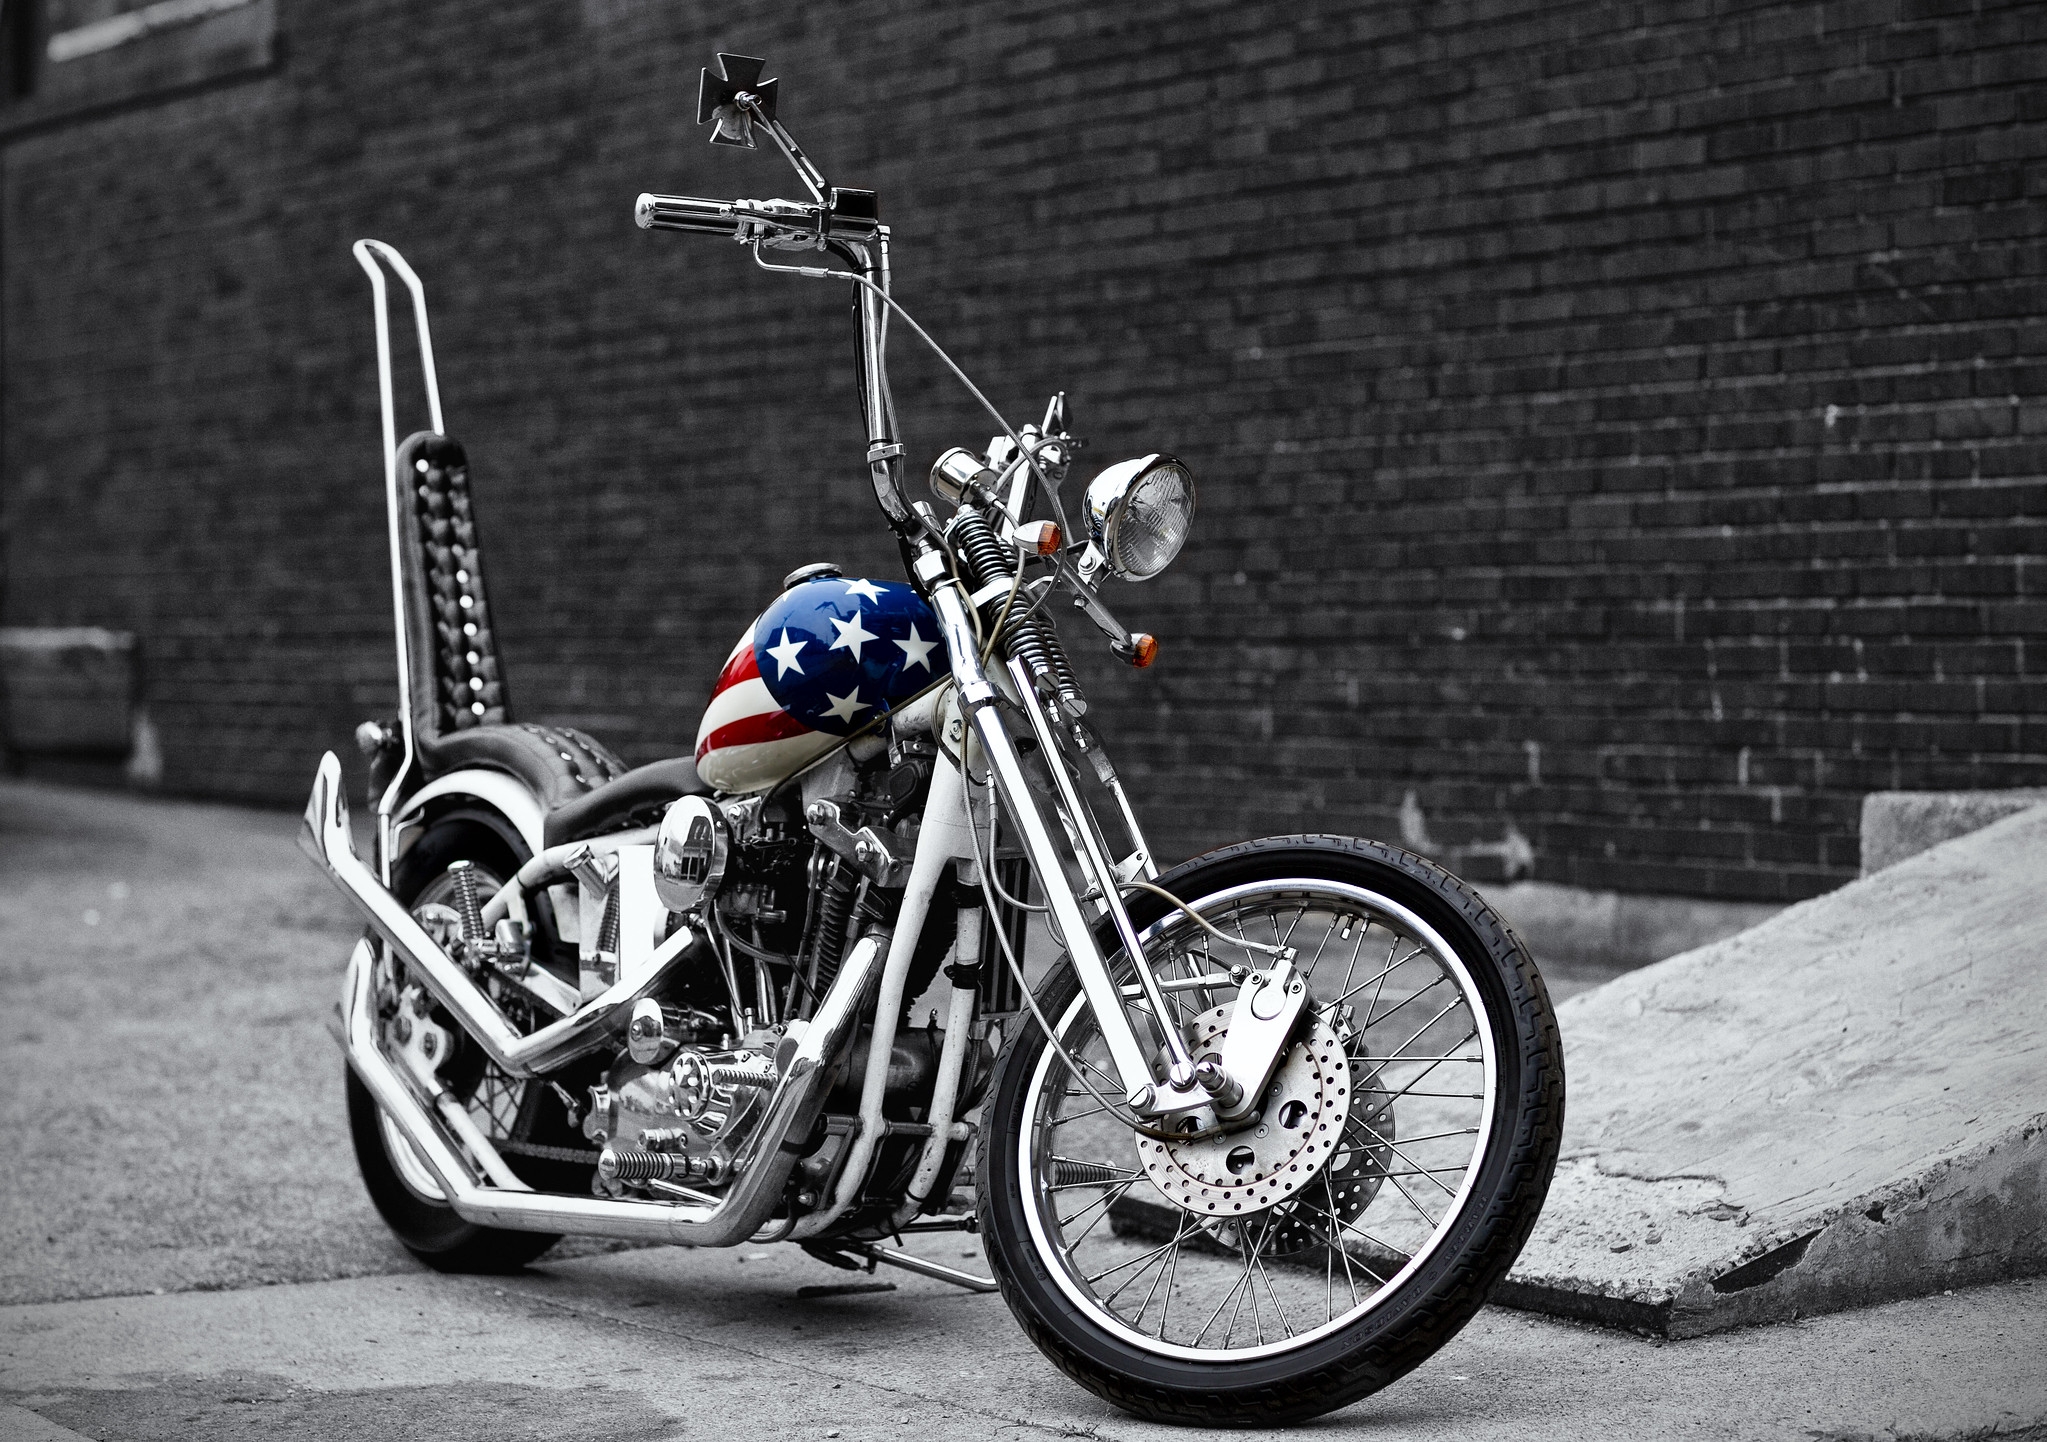 General 2047x1442 motorcycle chopper American flag Silver Motorcycles Easy Rider Captain America Harley-Davidson